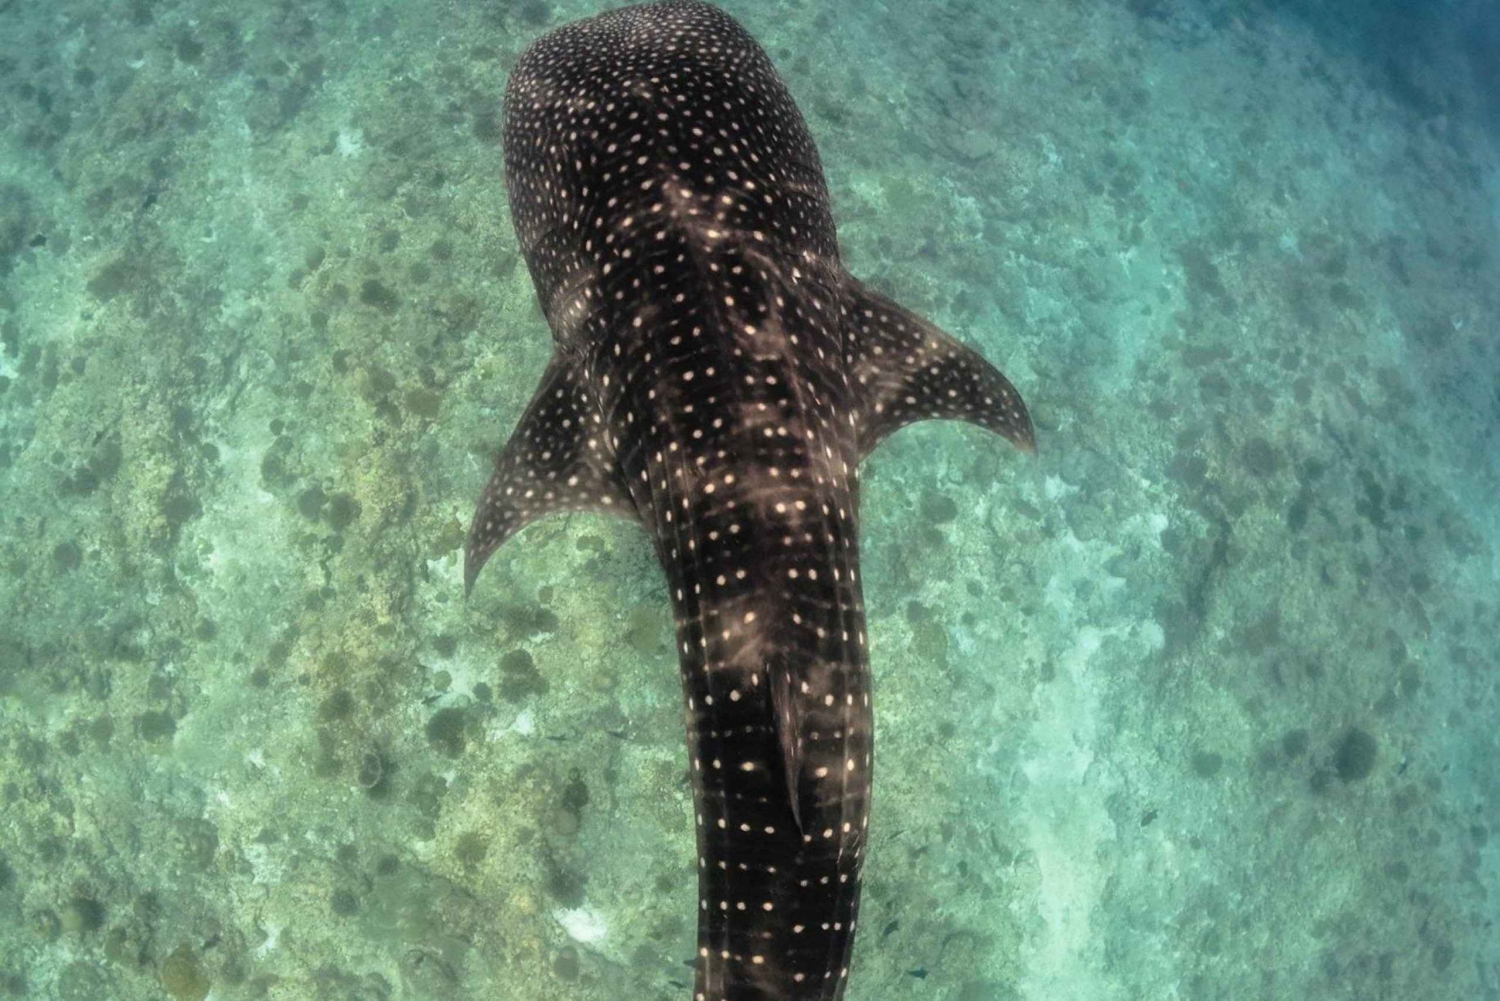 Los Cabos: Swim with Whale Sharks Snorkeling Adventure